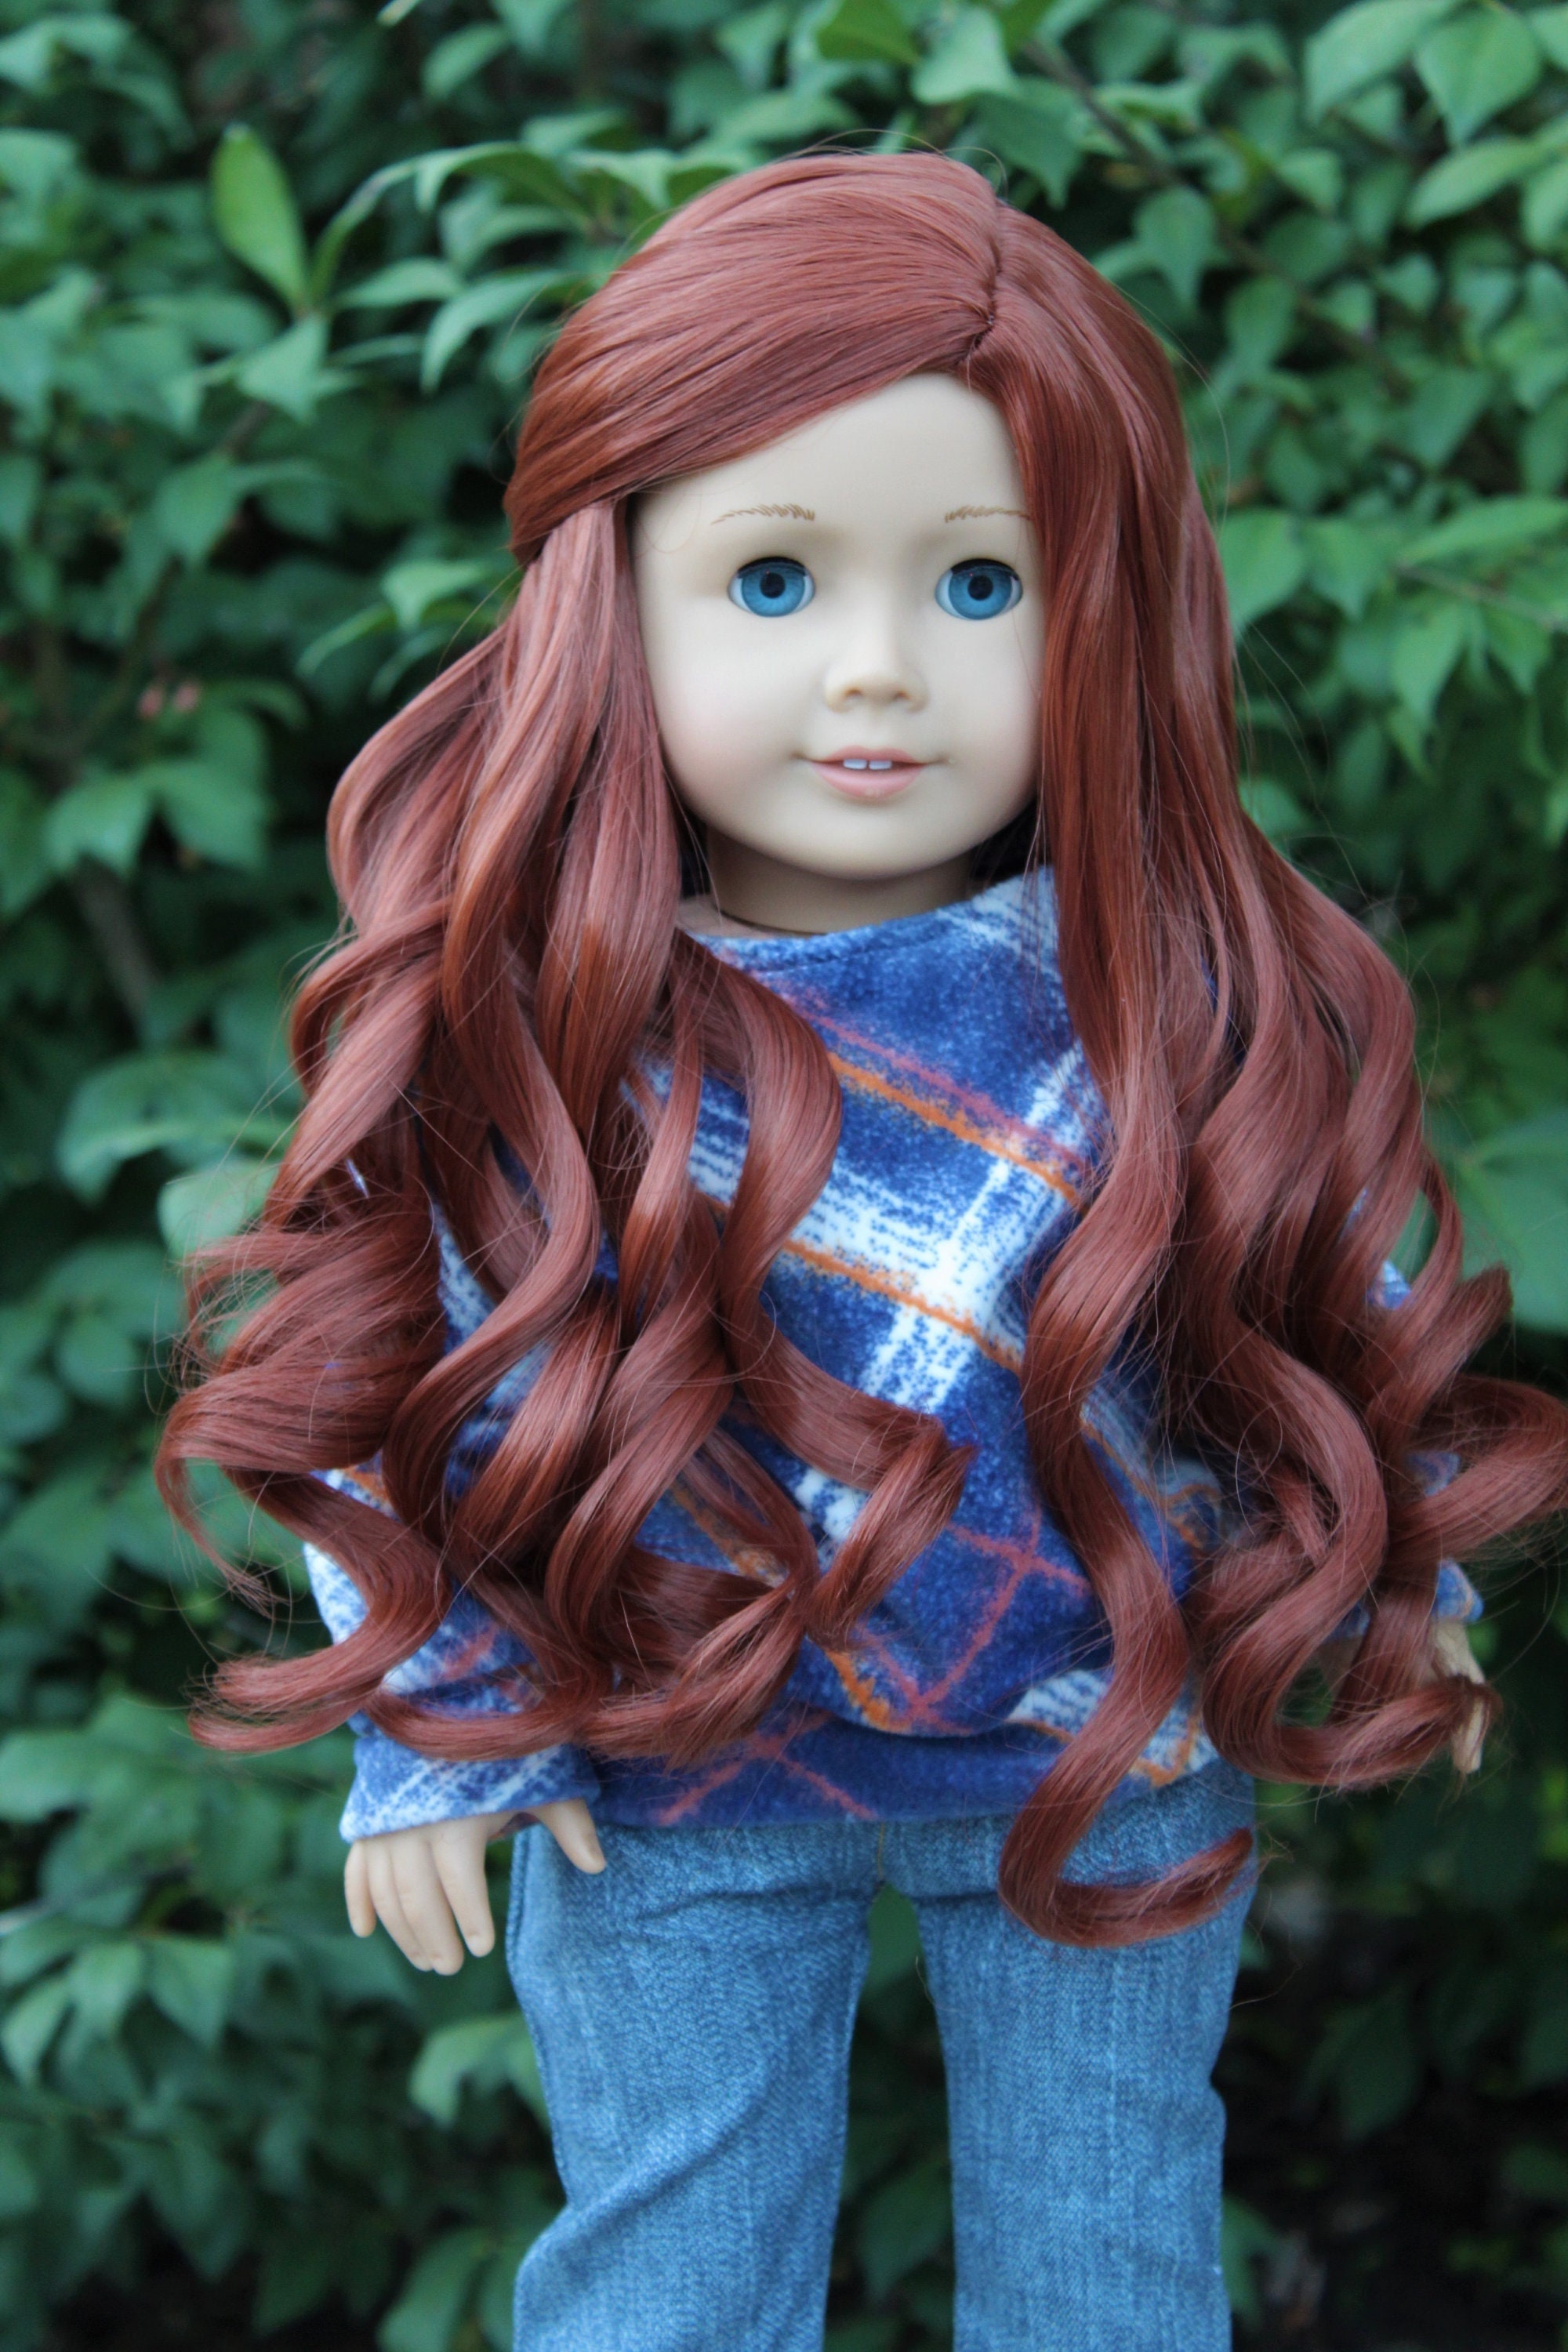 Hygloss Curly Doll Hair Red 4 oz